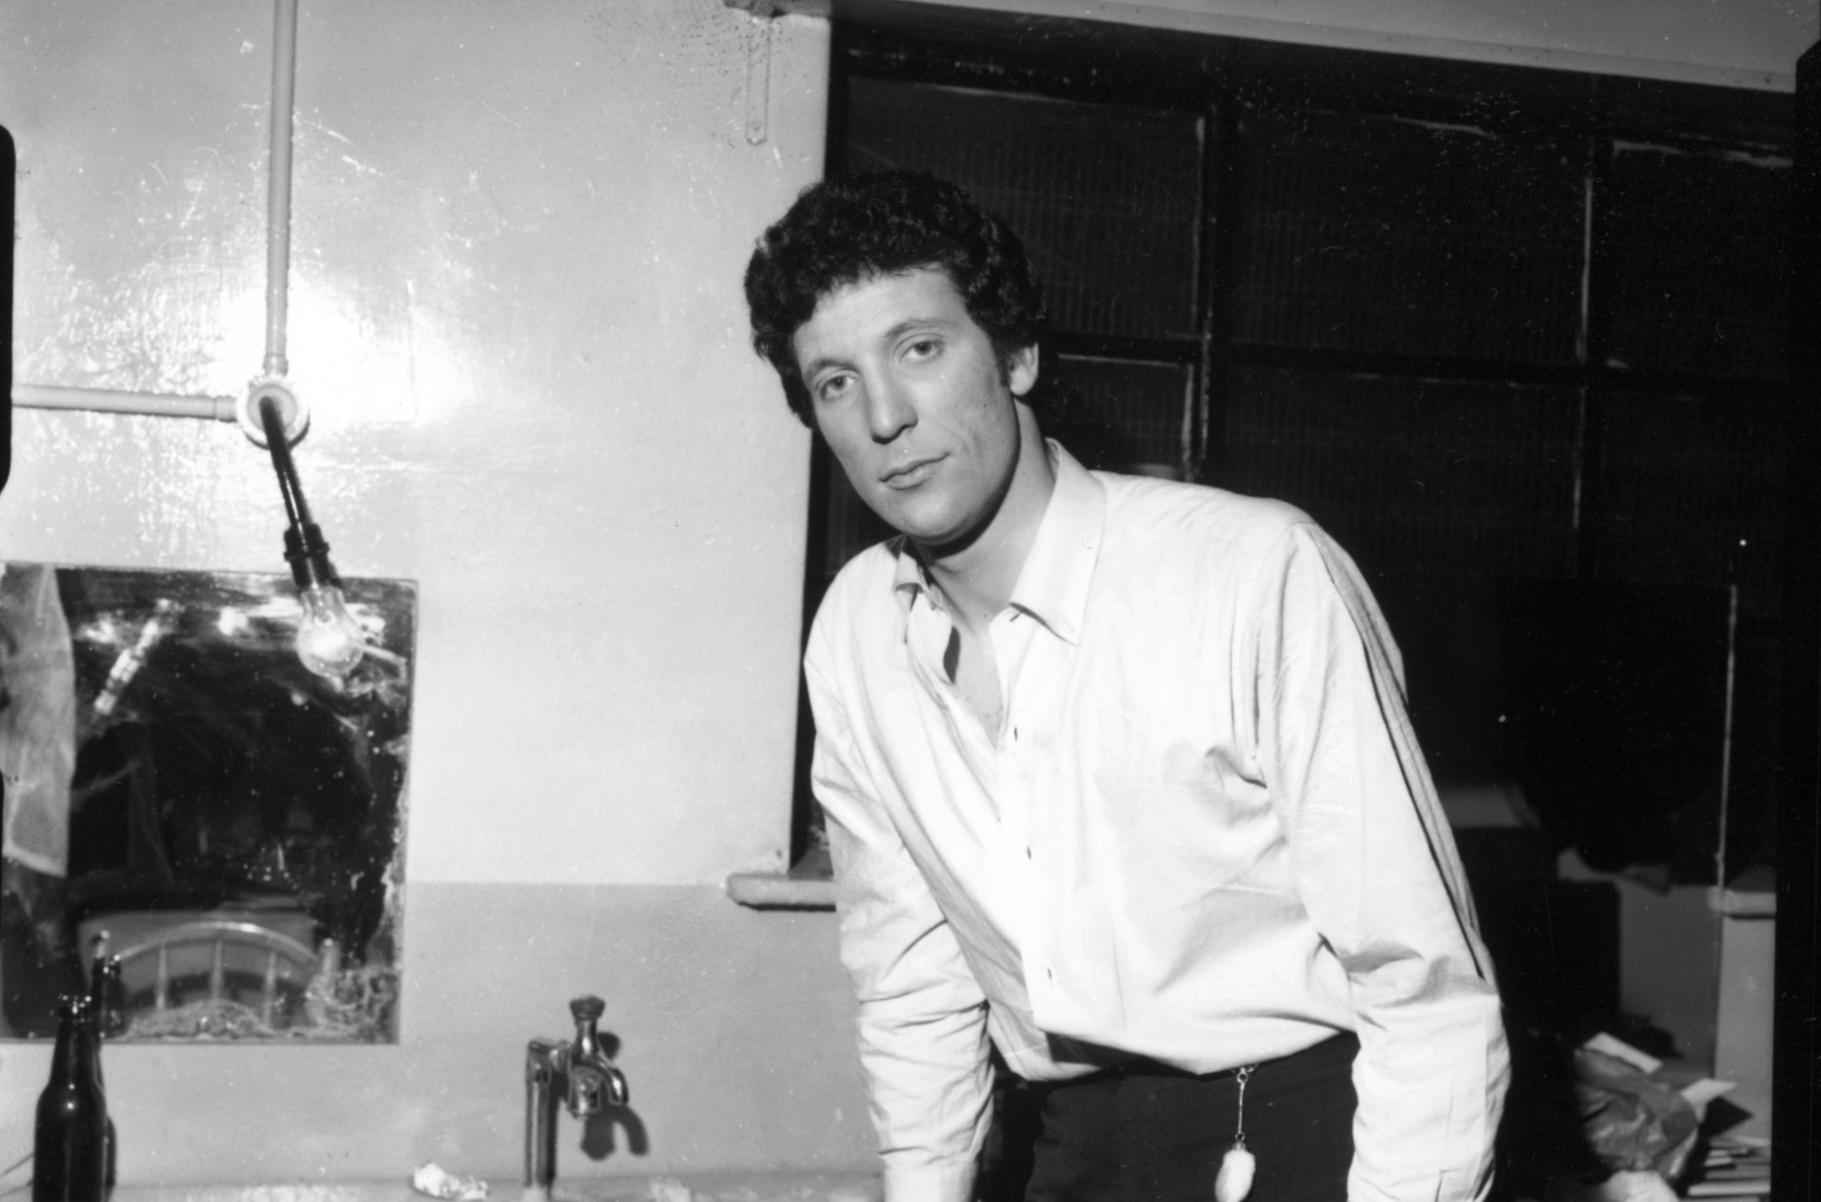 Tom Jones back stage at the Globe on February 13, 1965, as he was about to make his big time debut on February 13, 1965. PJ Proby had been sacked from a tour headlined by Cilla Black for disgracefully, and deliberately, sliding across the stage so that